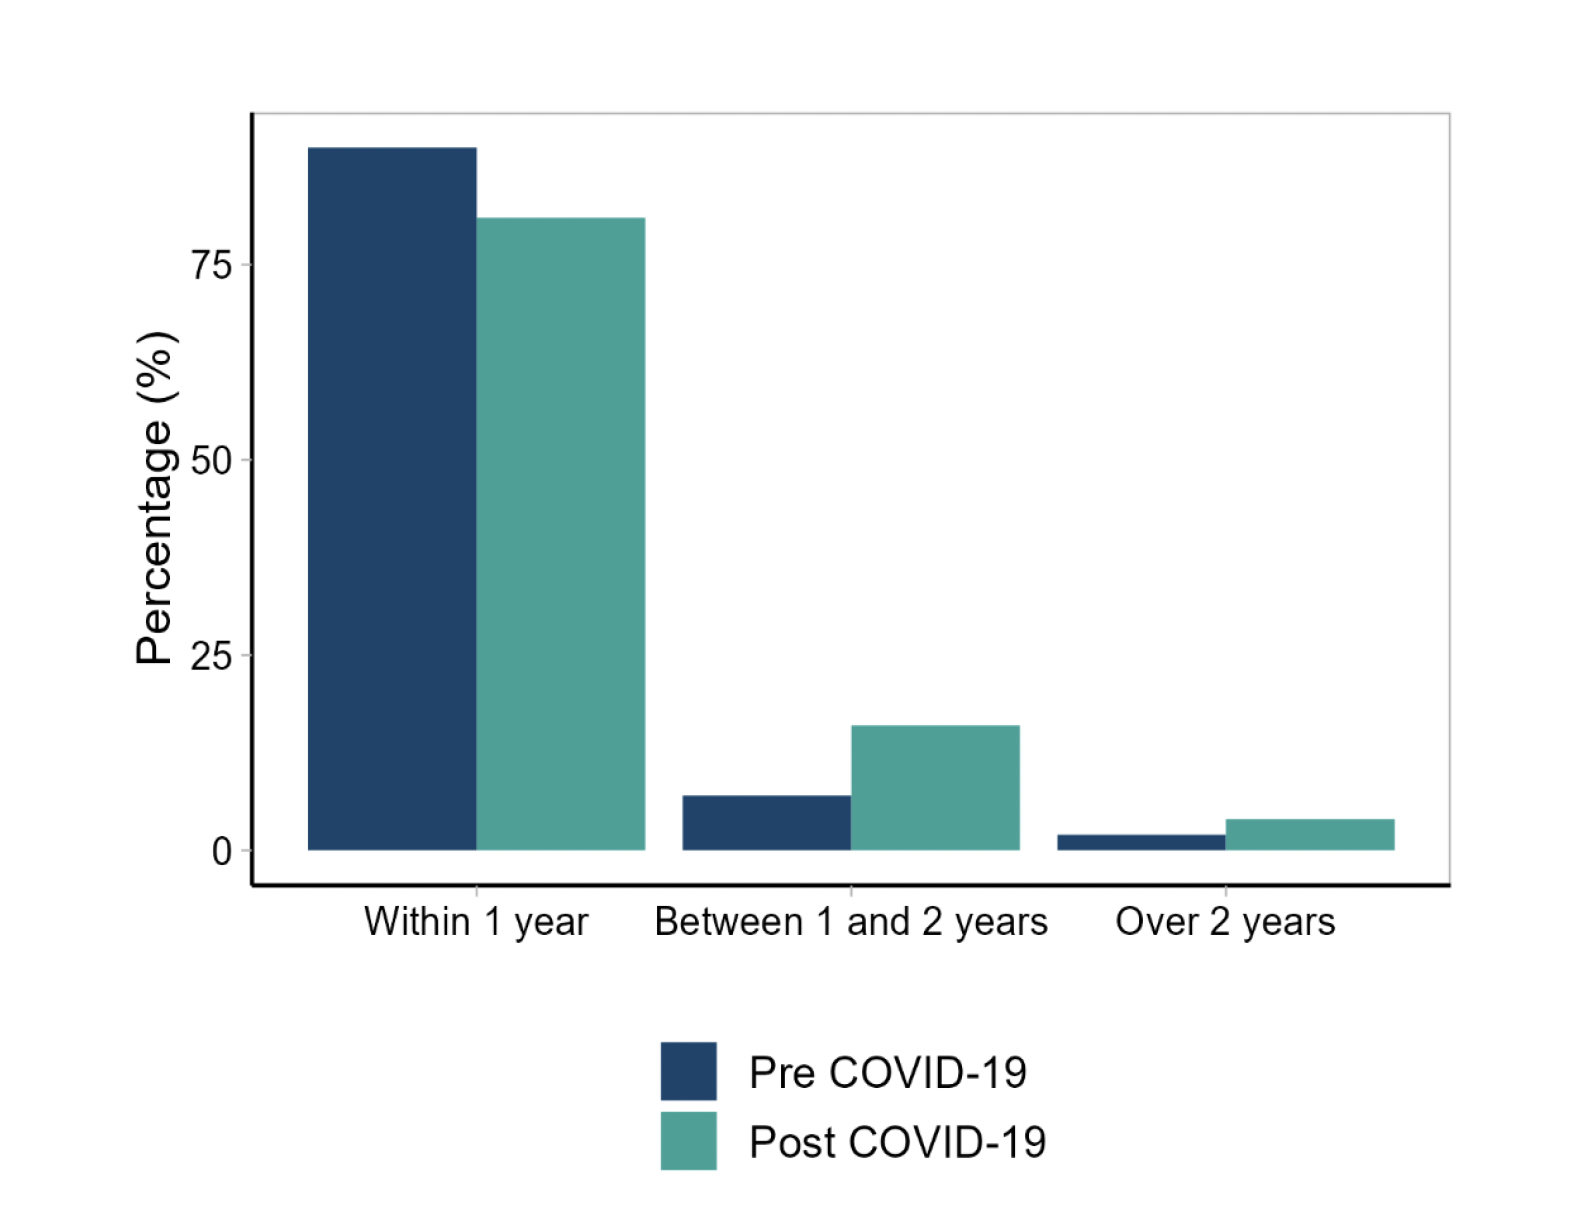 A bar chart showing that the percentage of accused in cases closed by COPFS, with a journey time of less than 1 year has decreased following the COVID-19 pandemic and the percentage between 1 and 2 years and over 2 years has increased.